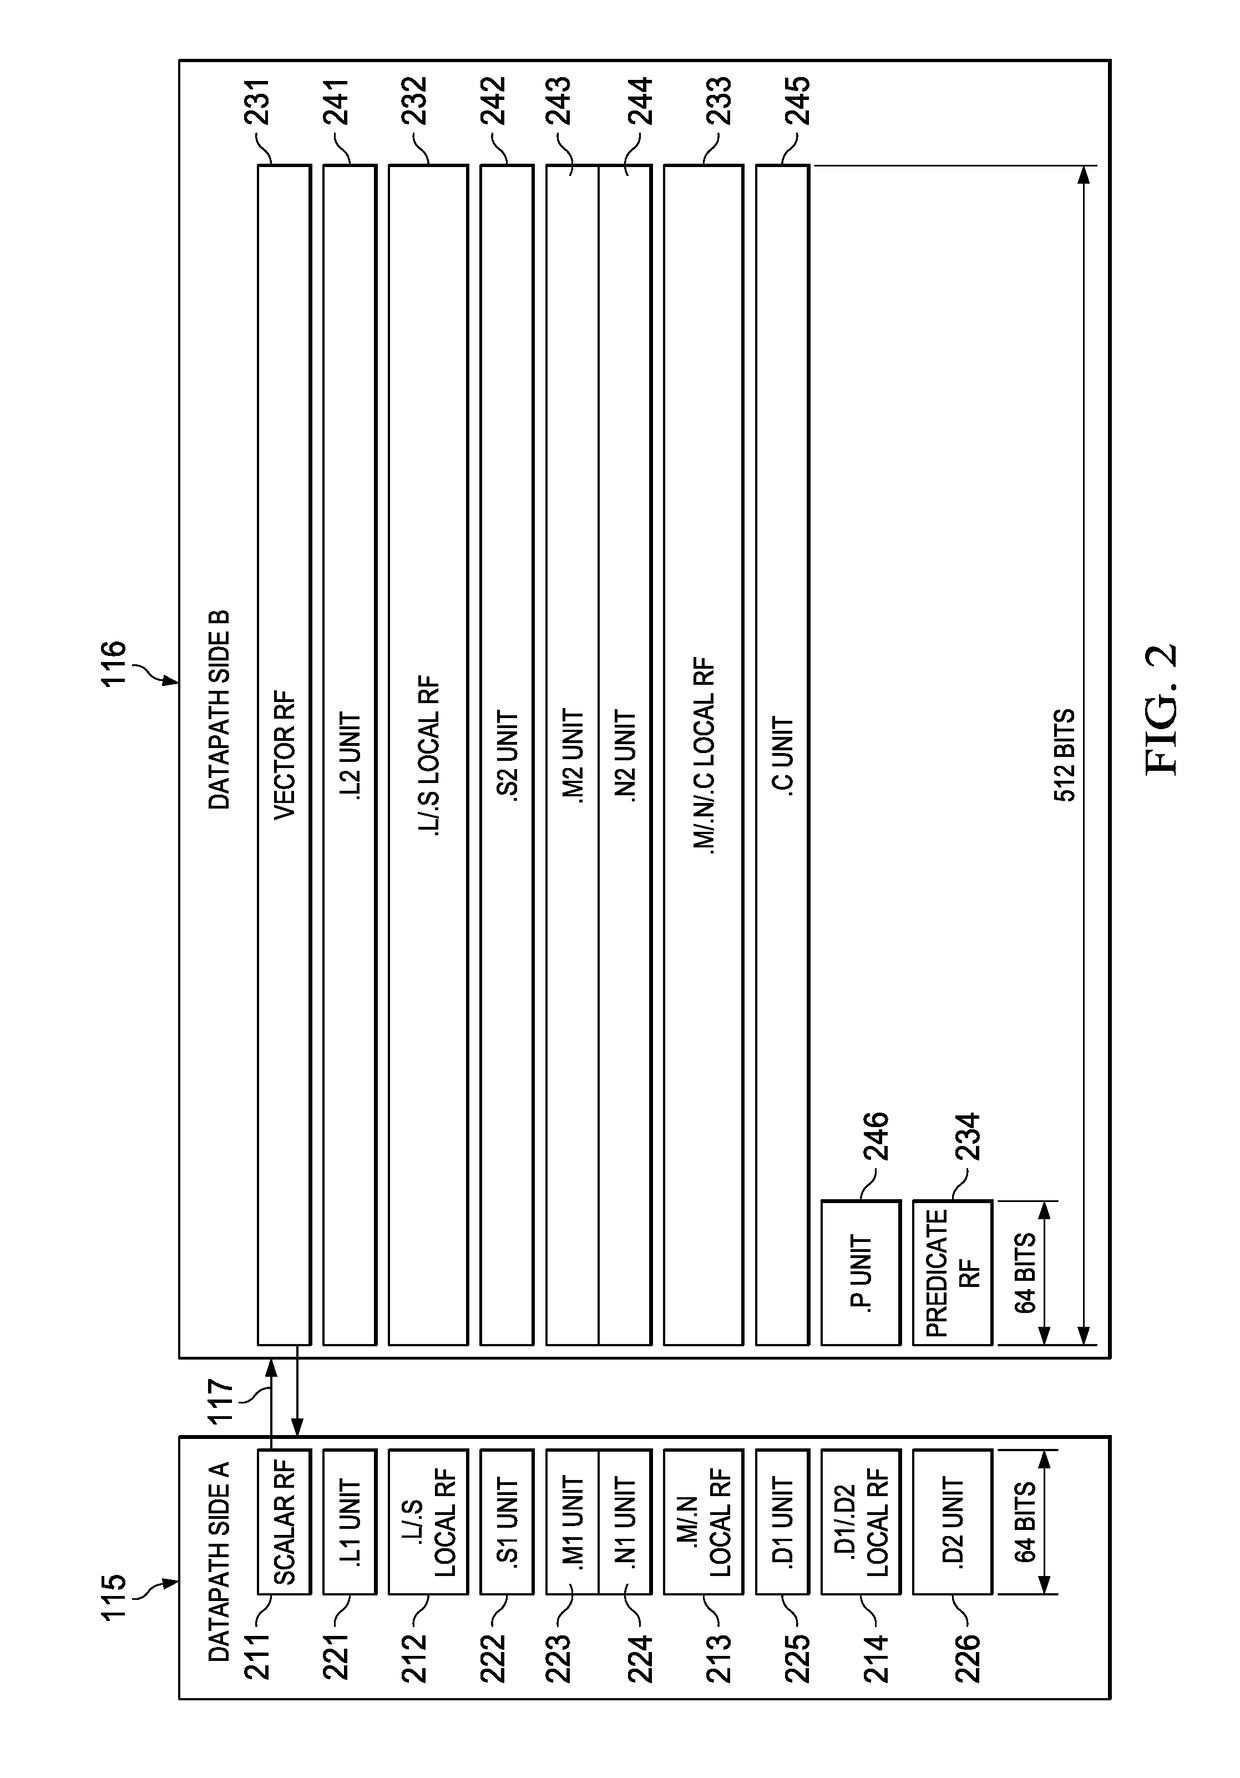 Data processing apparatus having streaming engine with read and read/advance operand coding